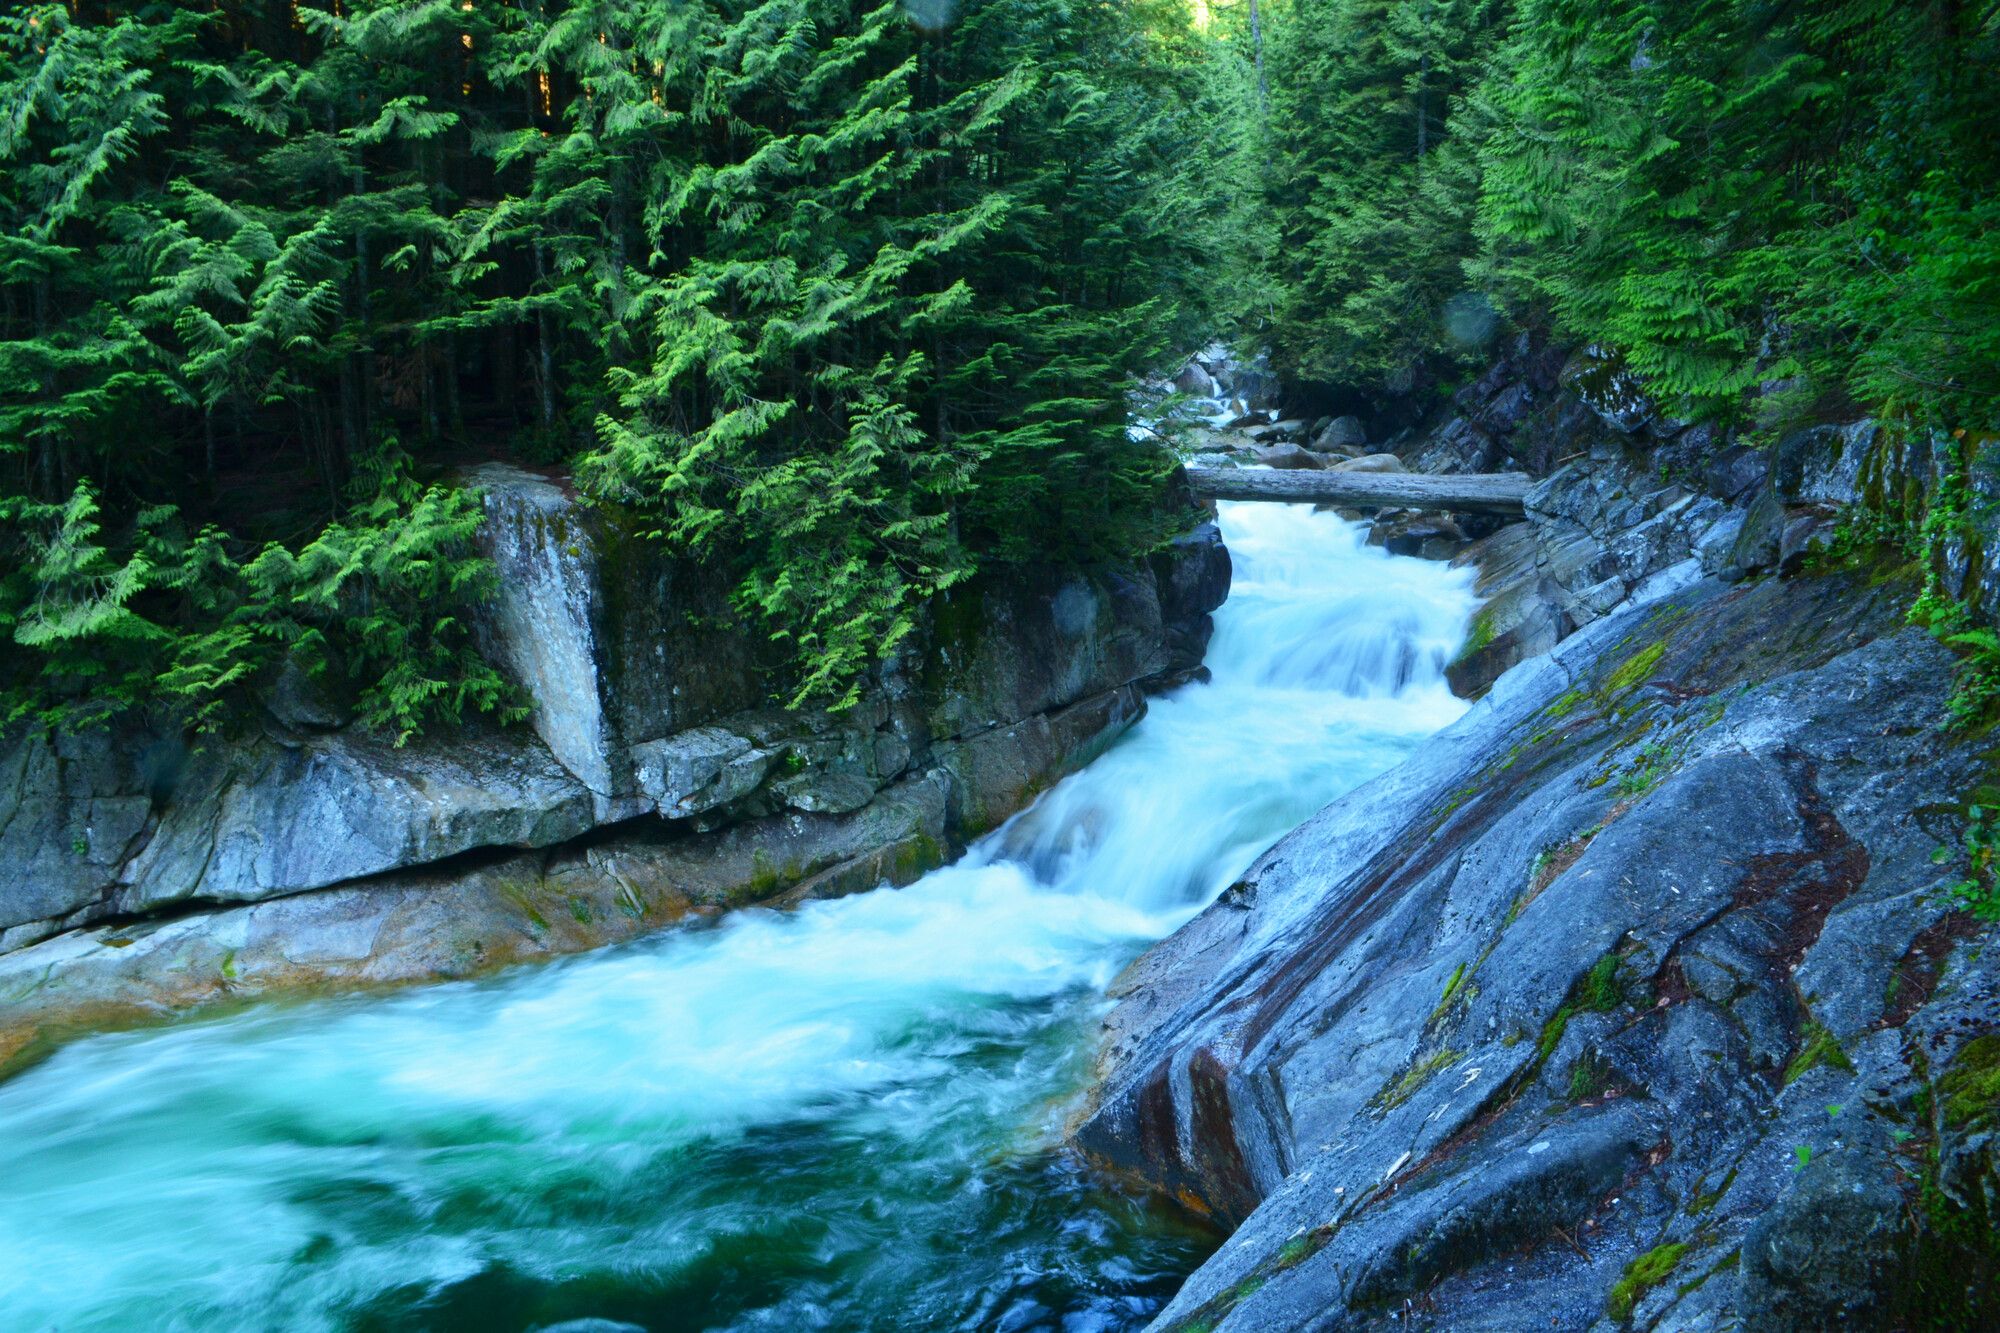 Golden Creek flowing down the canyon through the forest in Golden Ears Park.